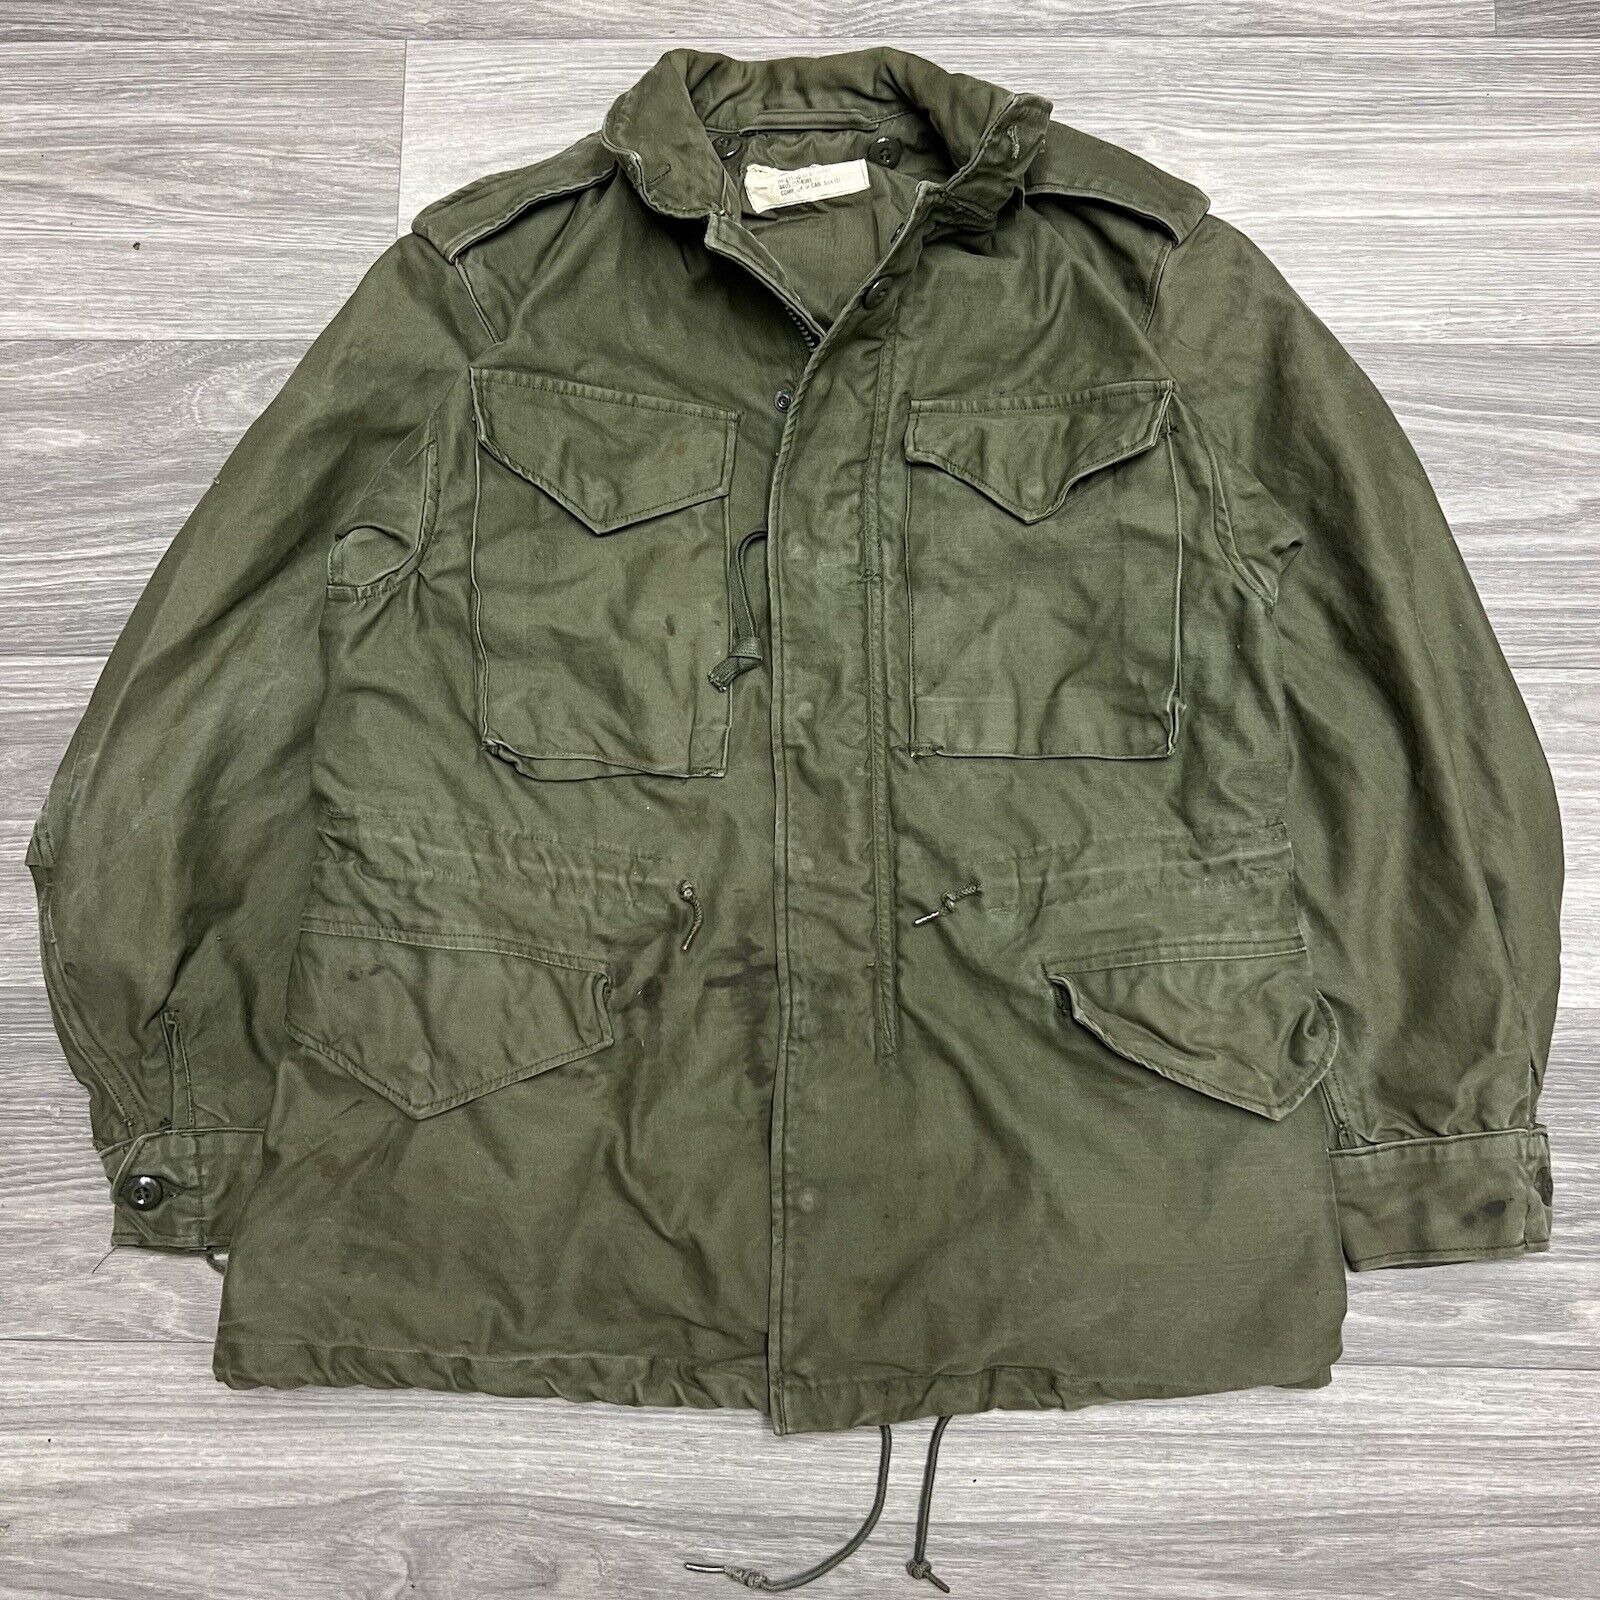 Vintage 50s US Army OG107 Cold Weather Field Jacket Mens Small Coat Military